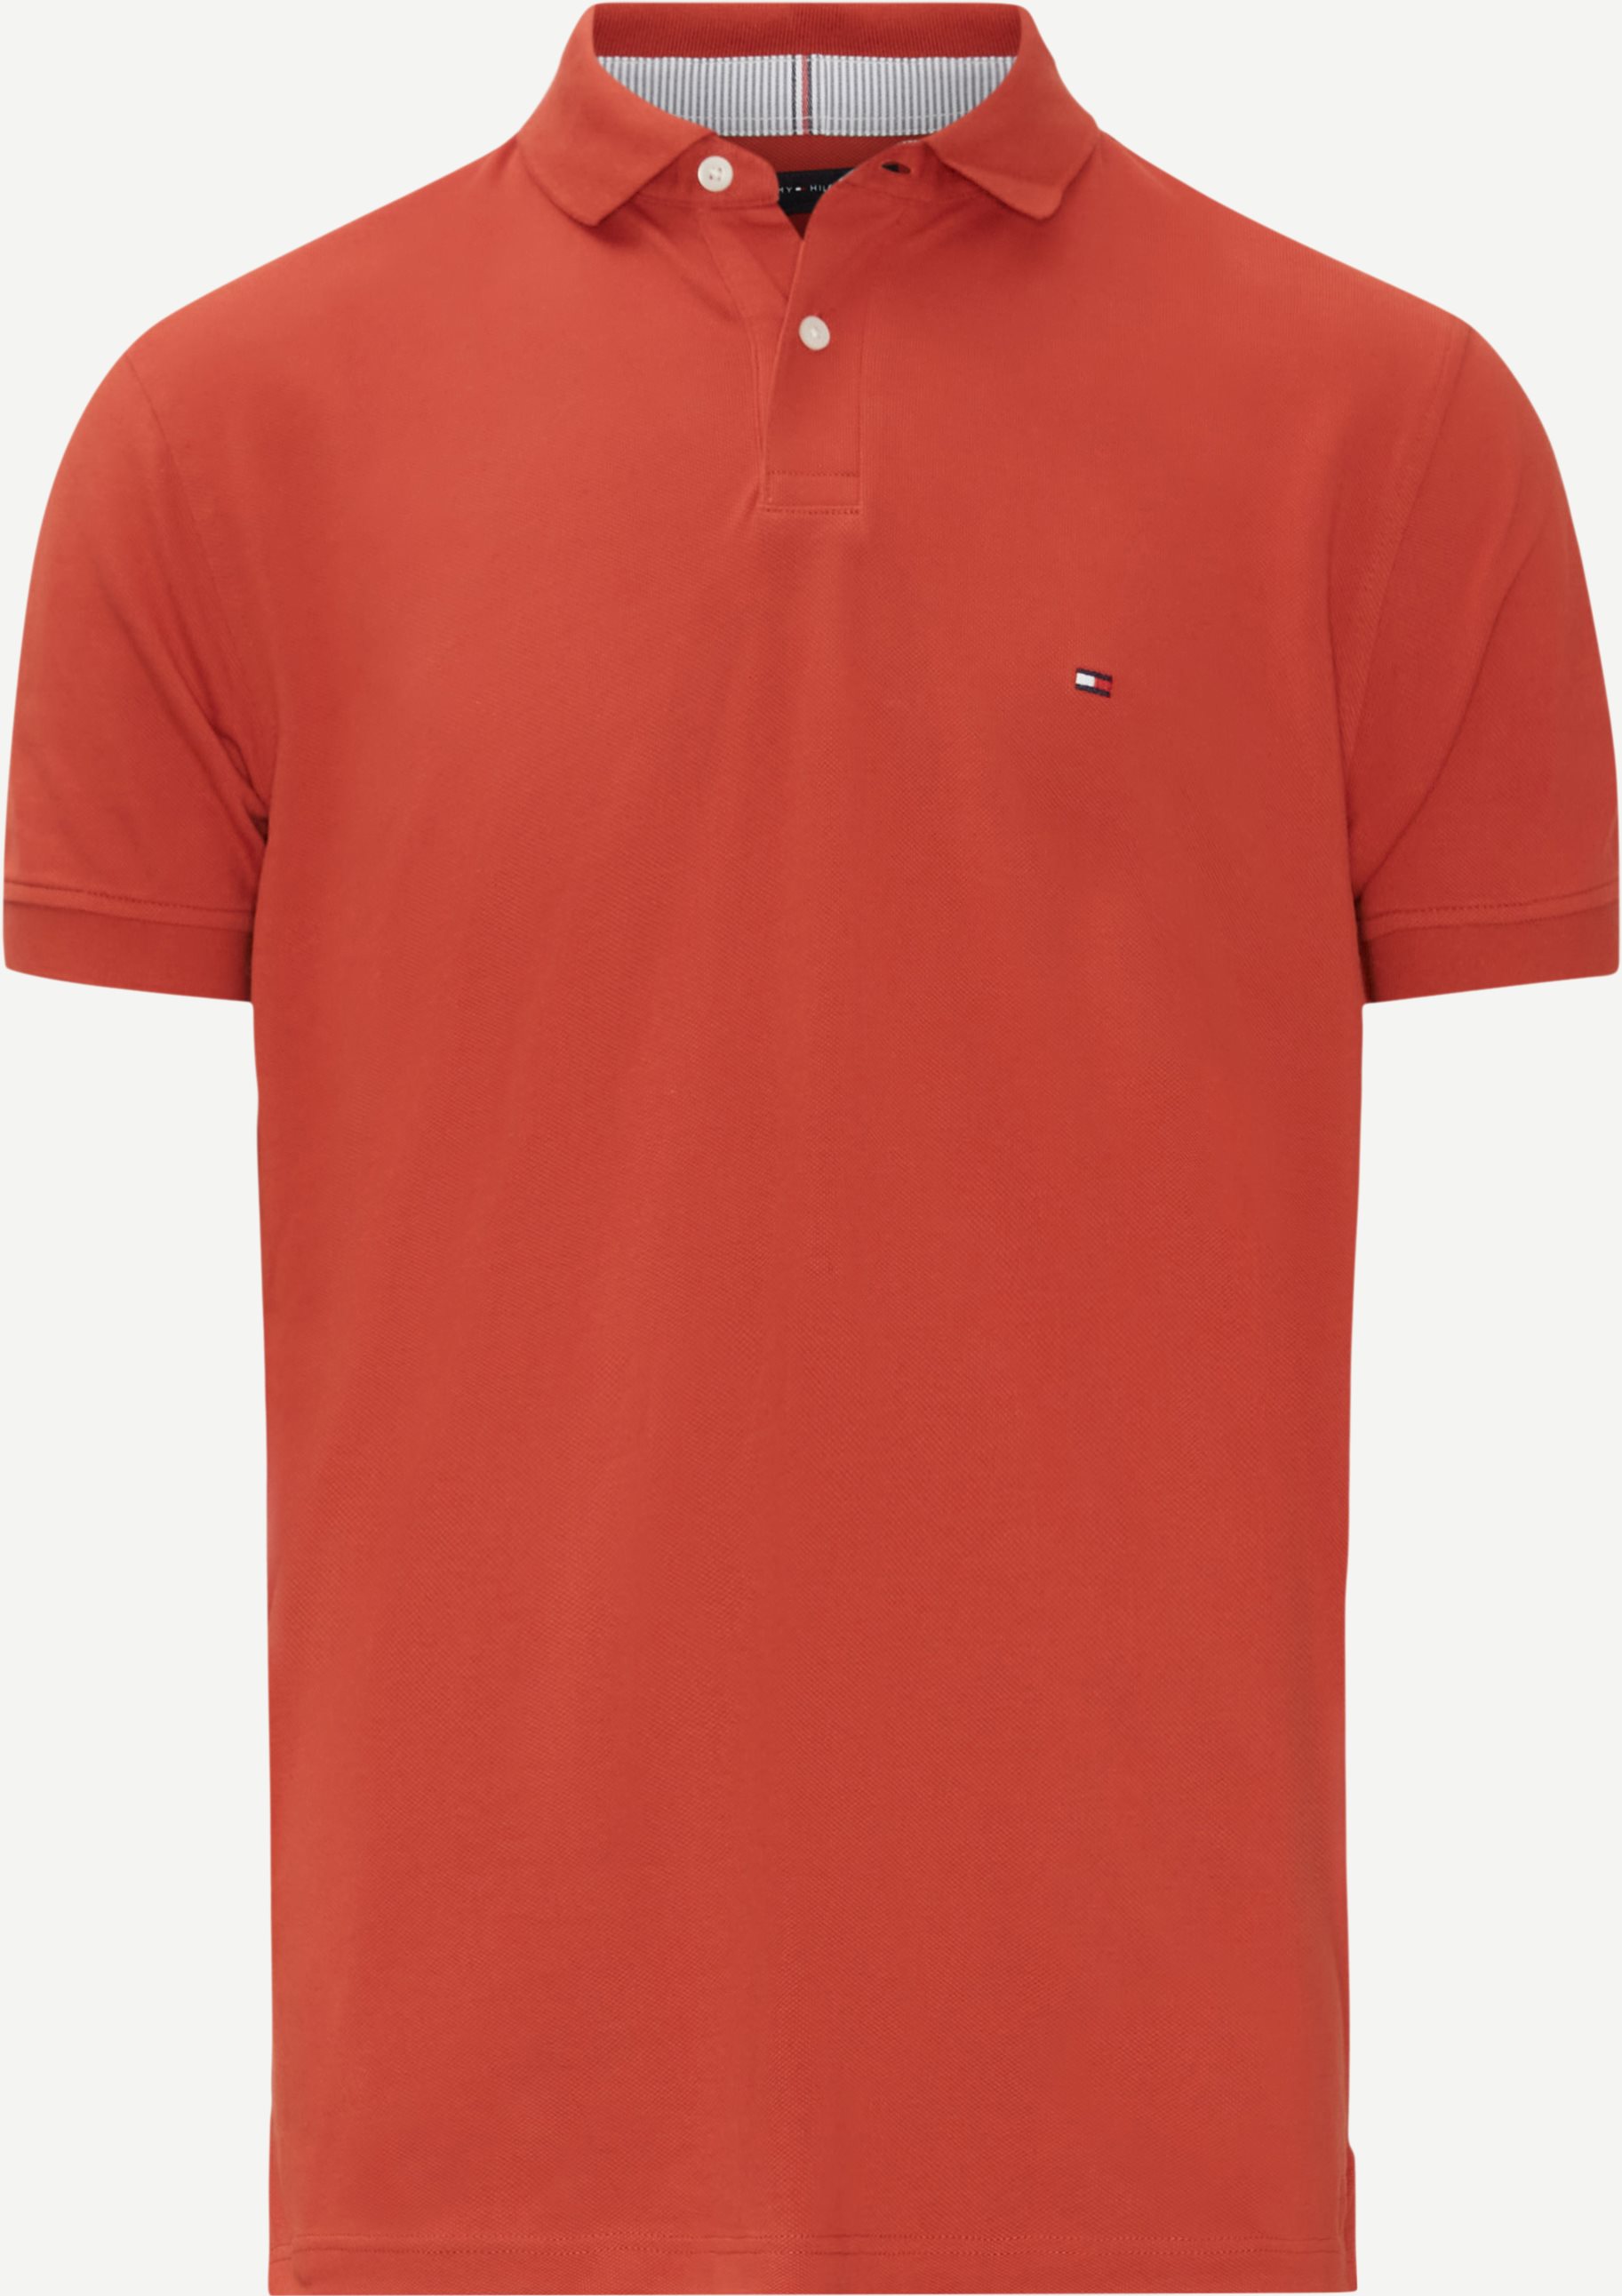 Tommy Hilfiger T-shirts 17770 CORE 1985 REGULAR POLO Red